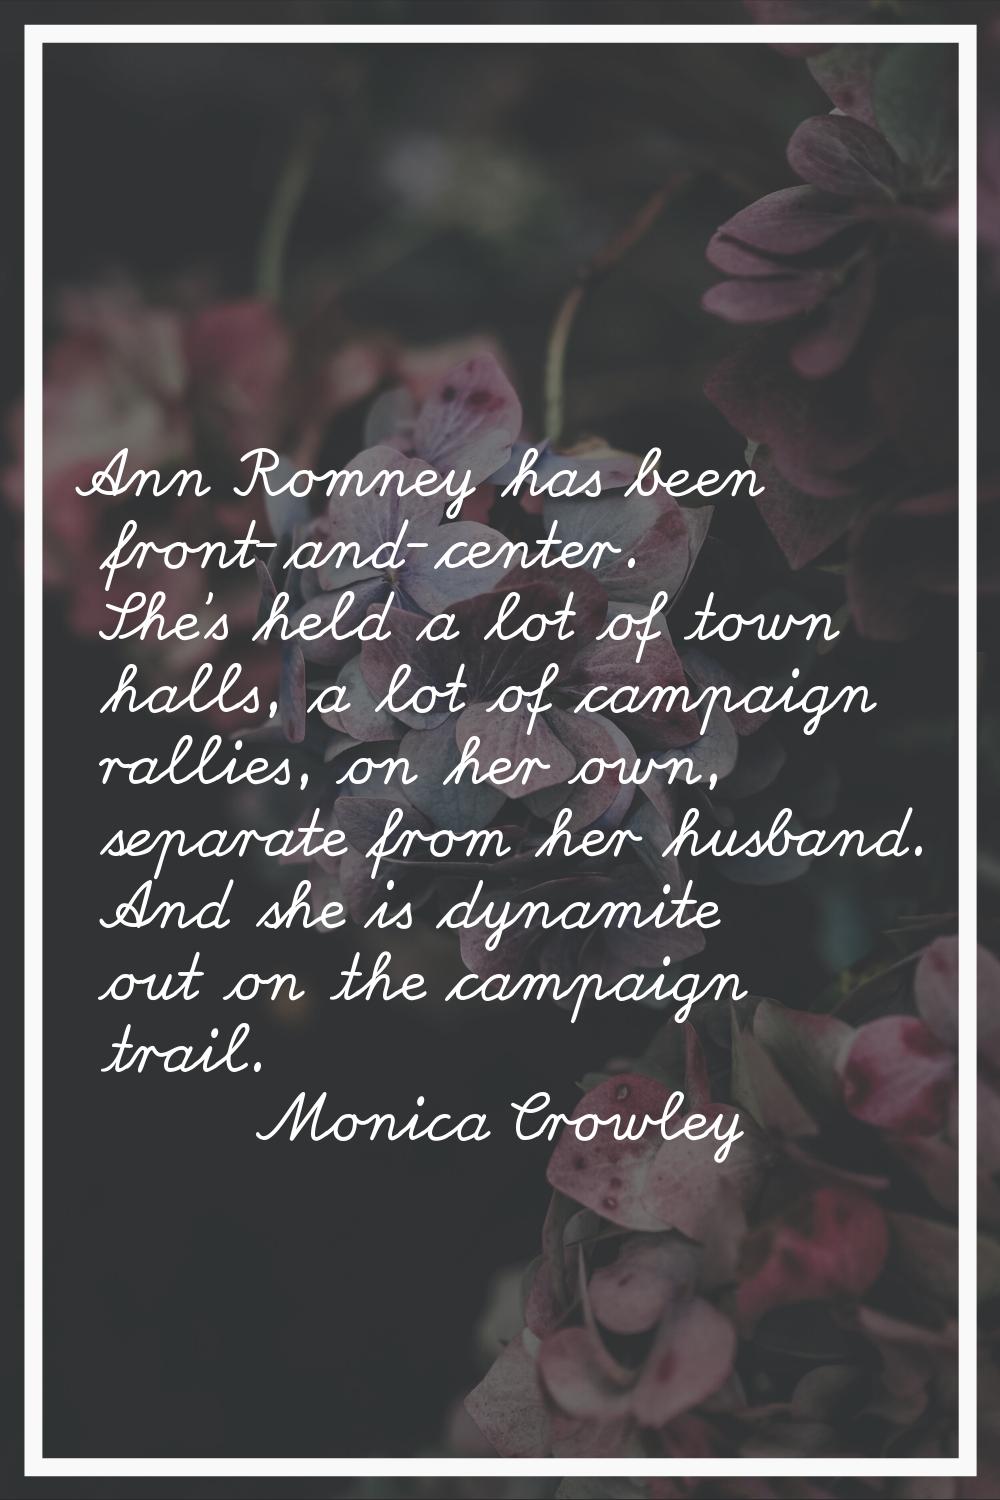 Ann Romney has been front-and-center. She's held a lot of town halls, a lot of campaign rallies, on